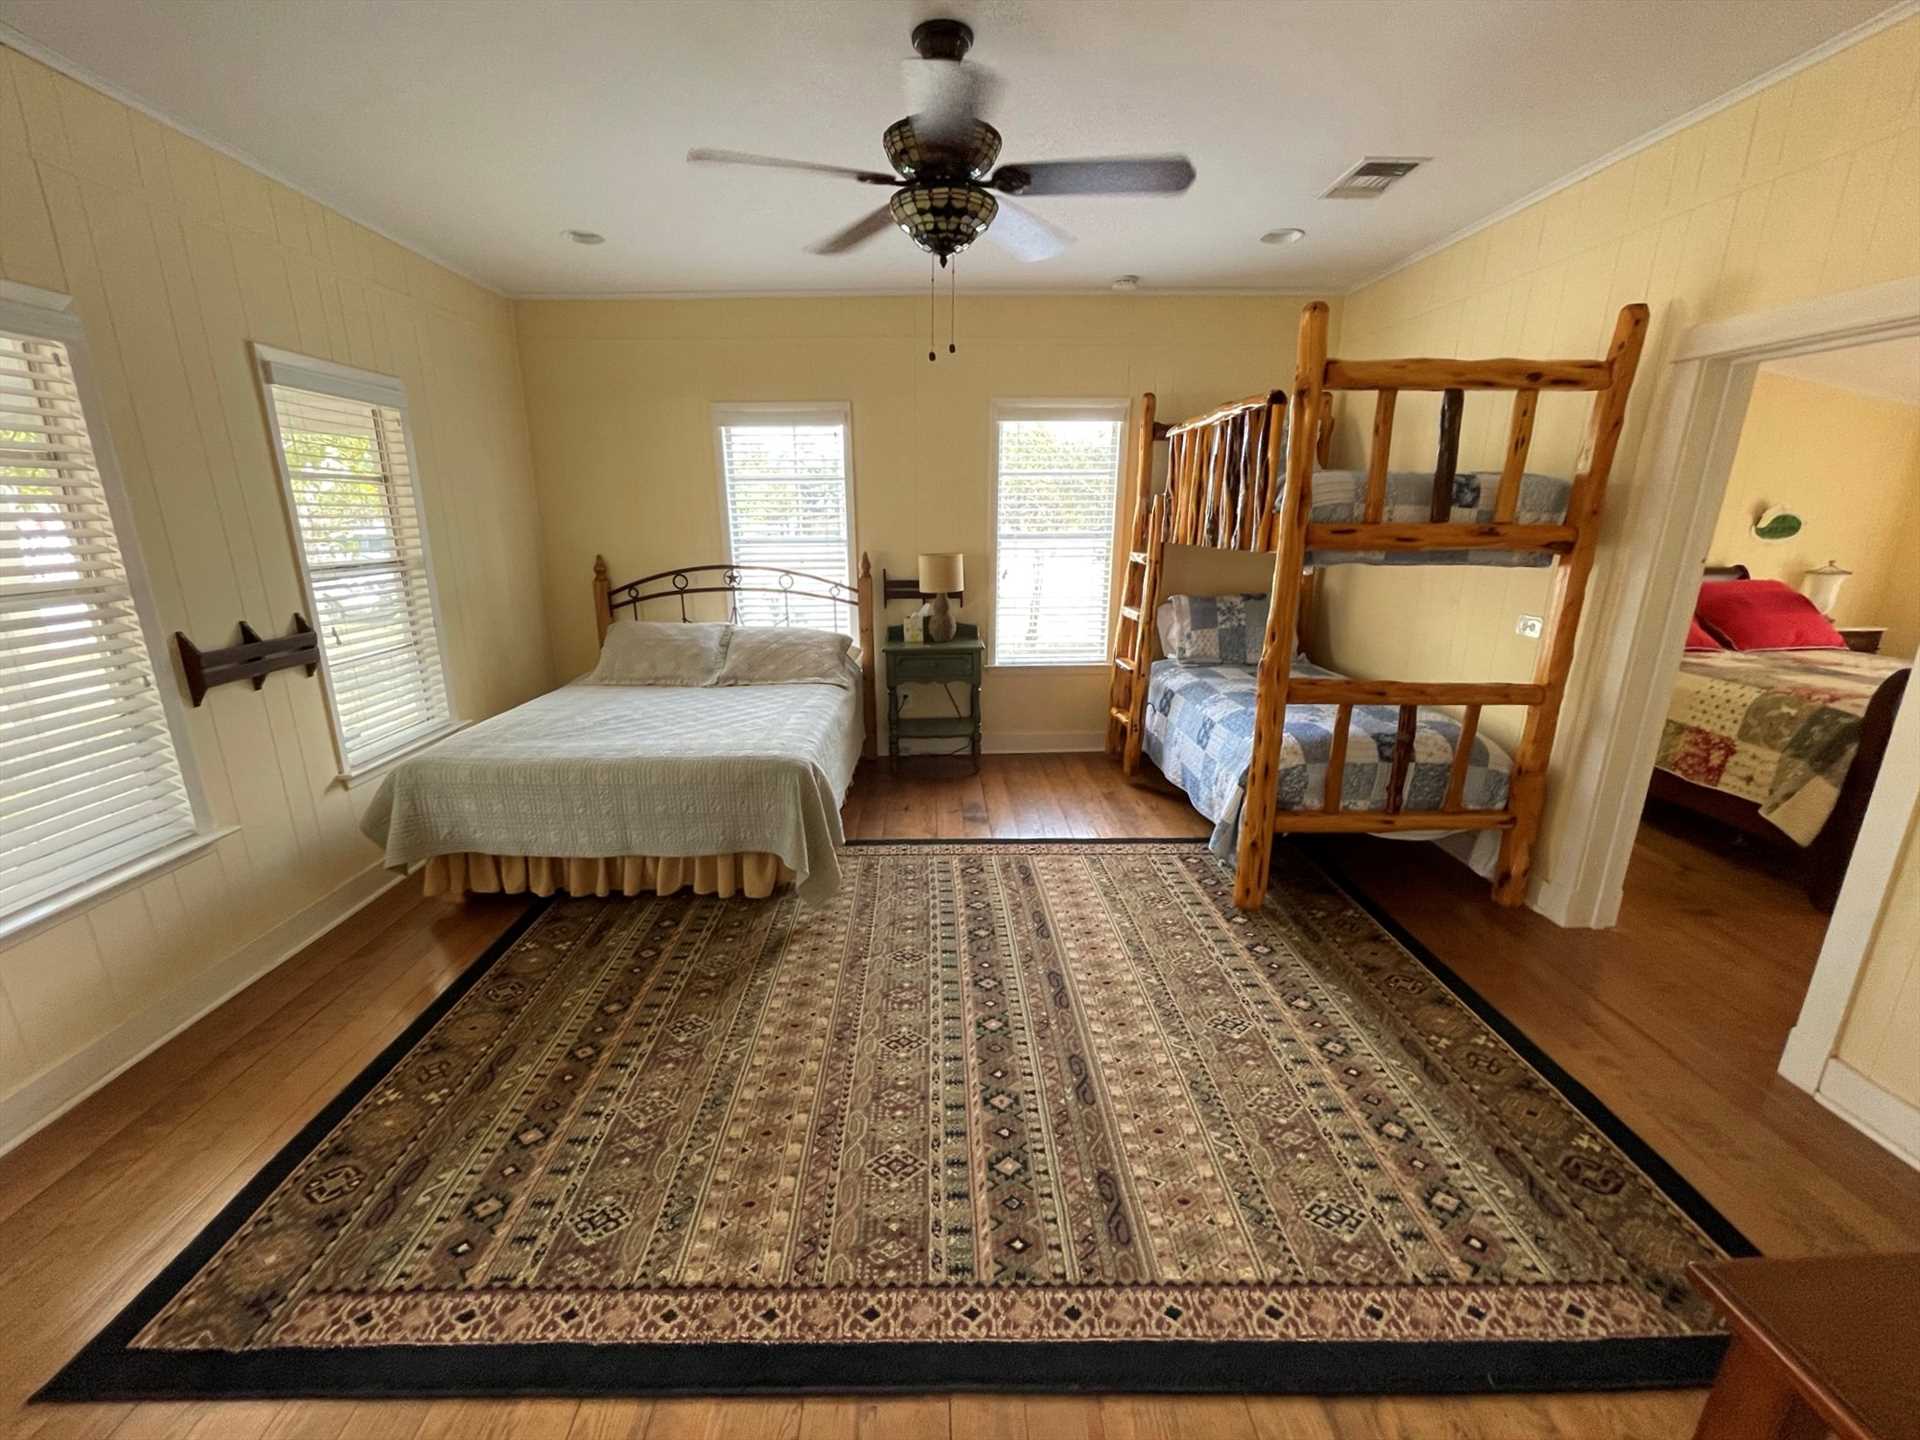                                                 Soft and warm queen and twin bunk beds comfortably sleep up to four guests in the second bedroom. Clean linens are included, too!